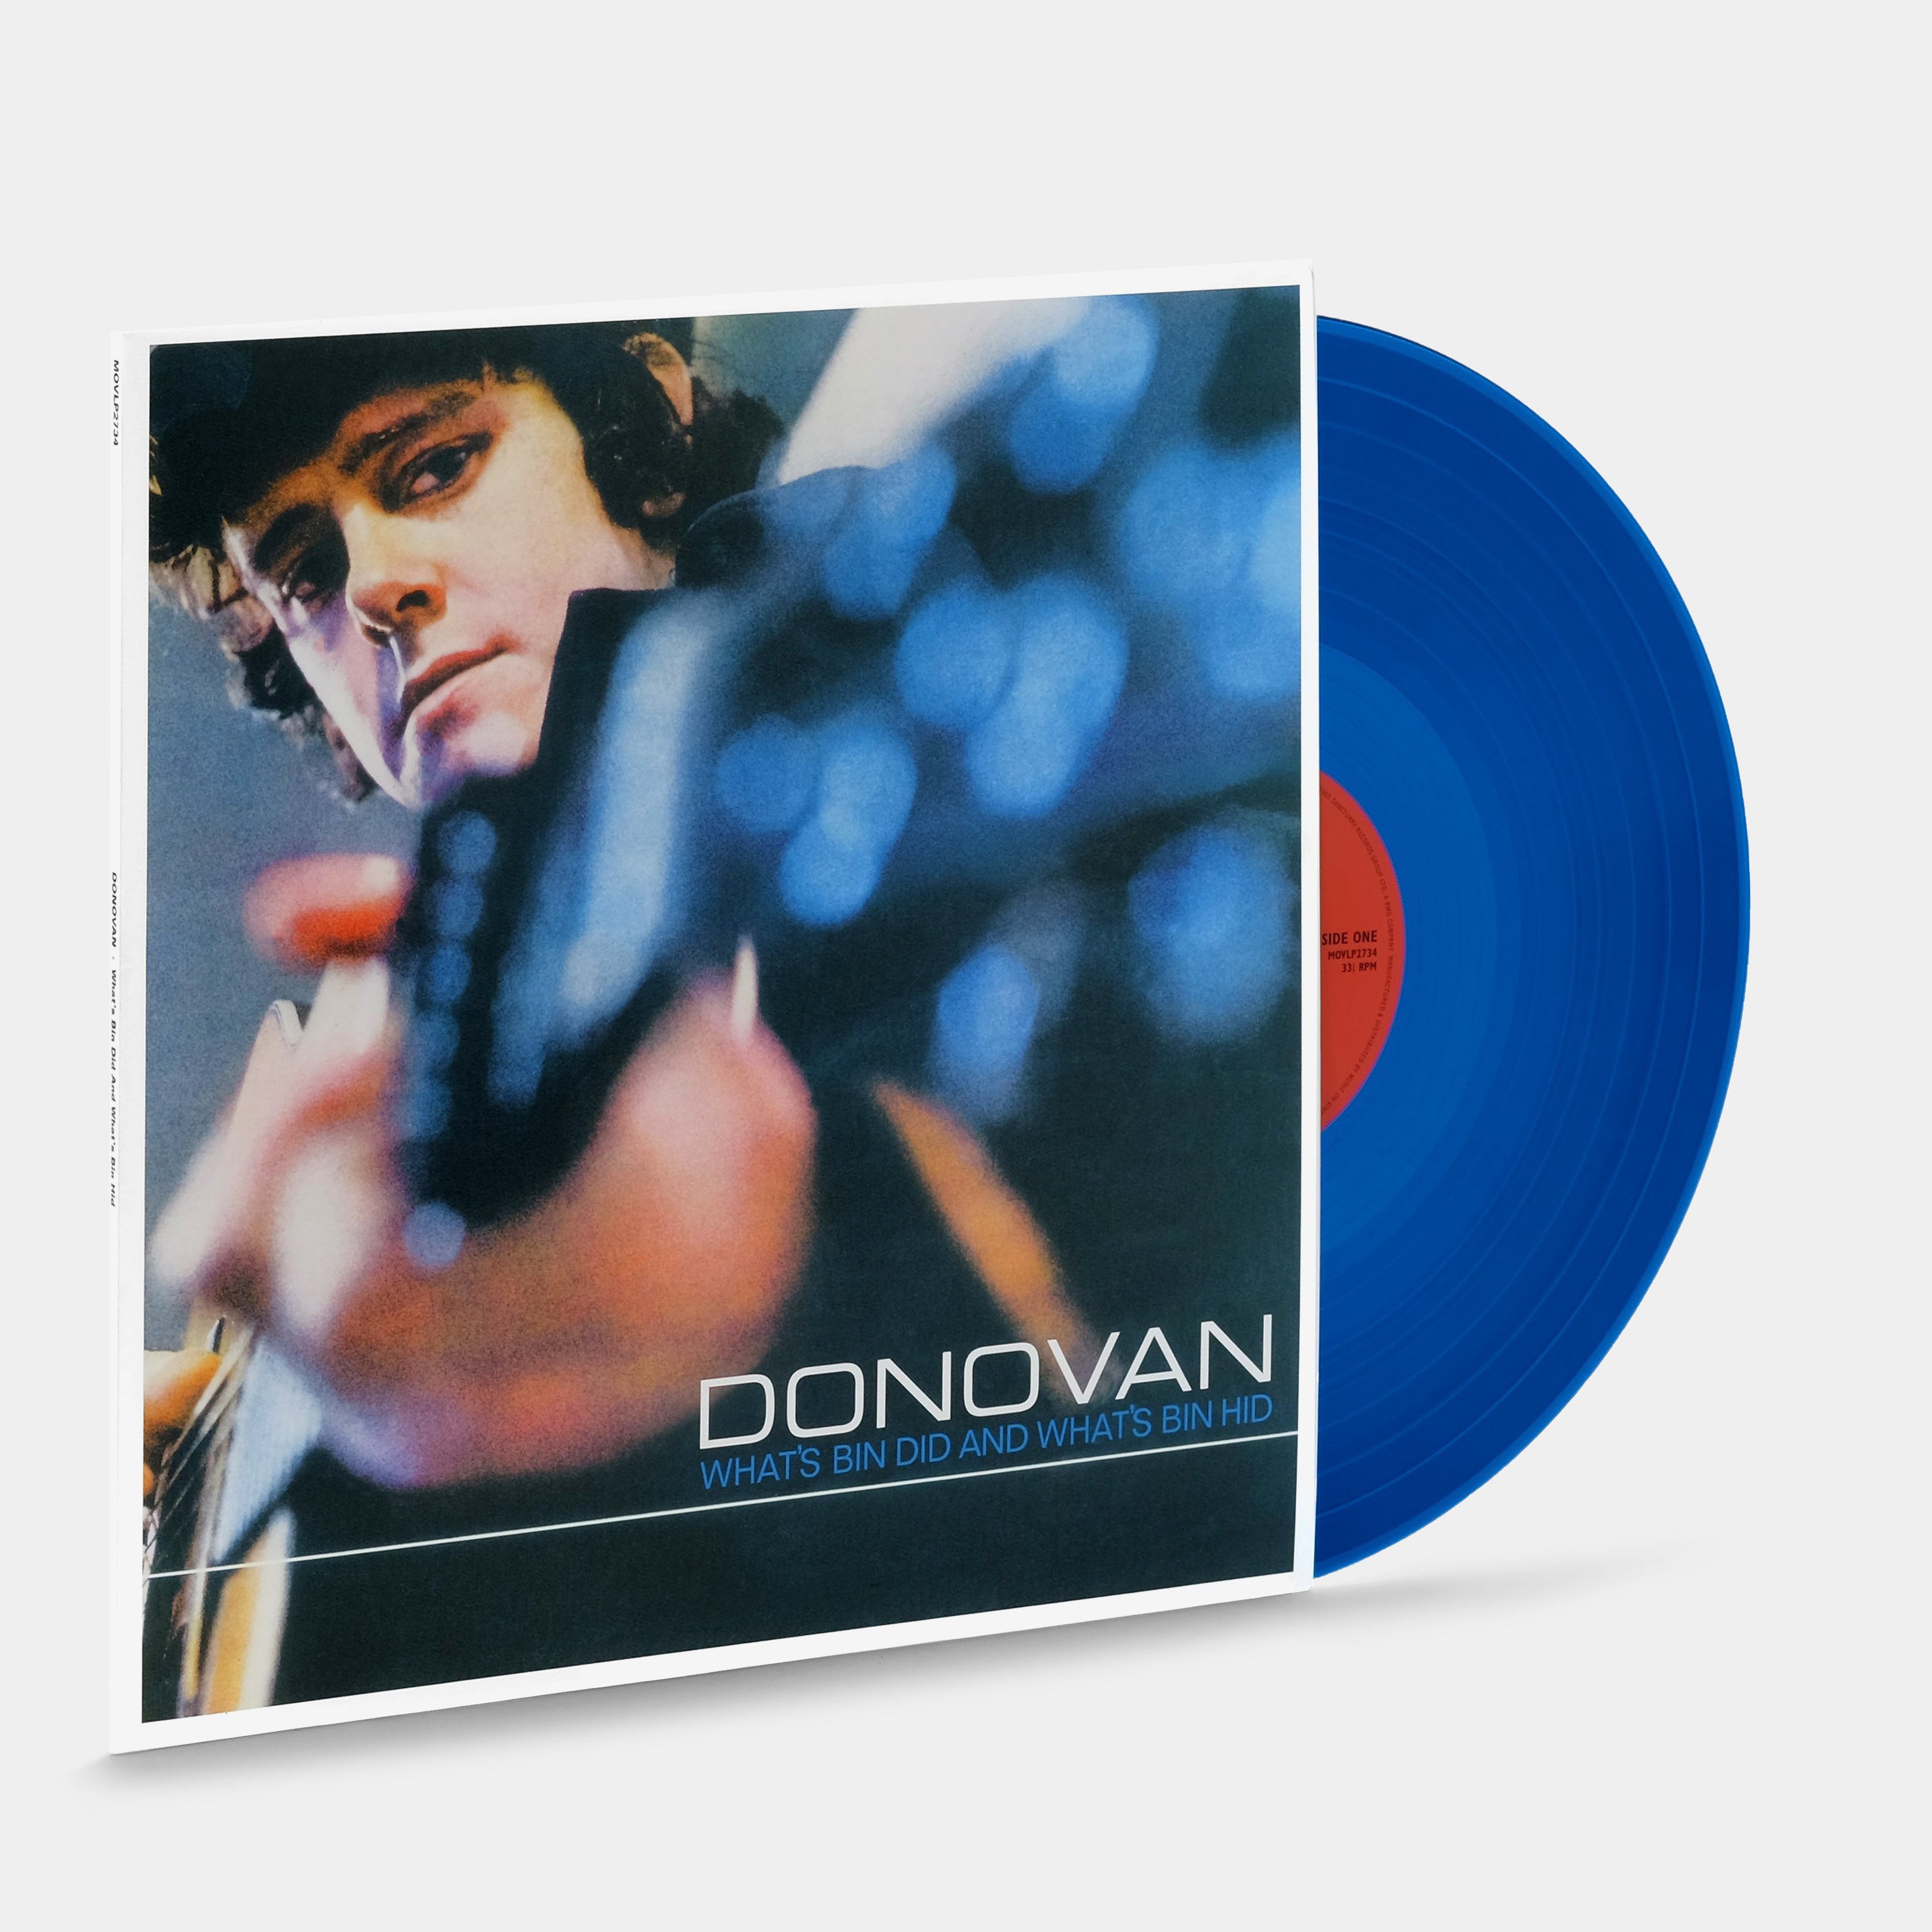 Donovan - What's Bin Did and What's Bin Hid LP Translucent Blue Vinyl Record